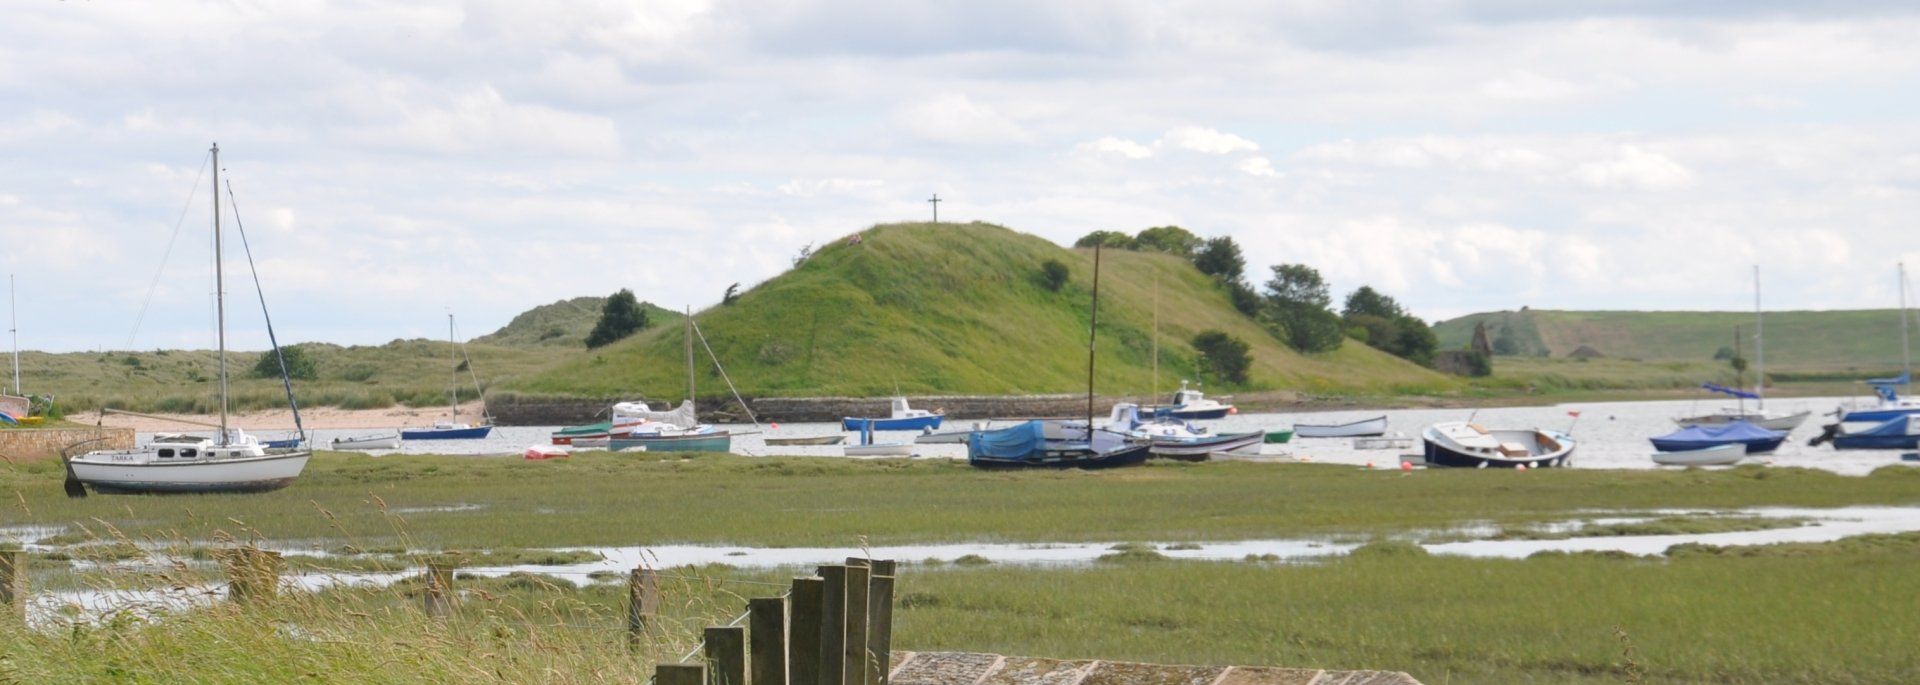 Church Hill viewed from across the estuary